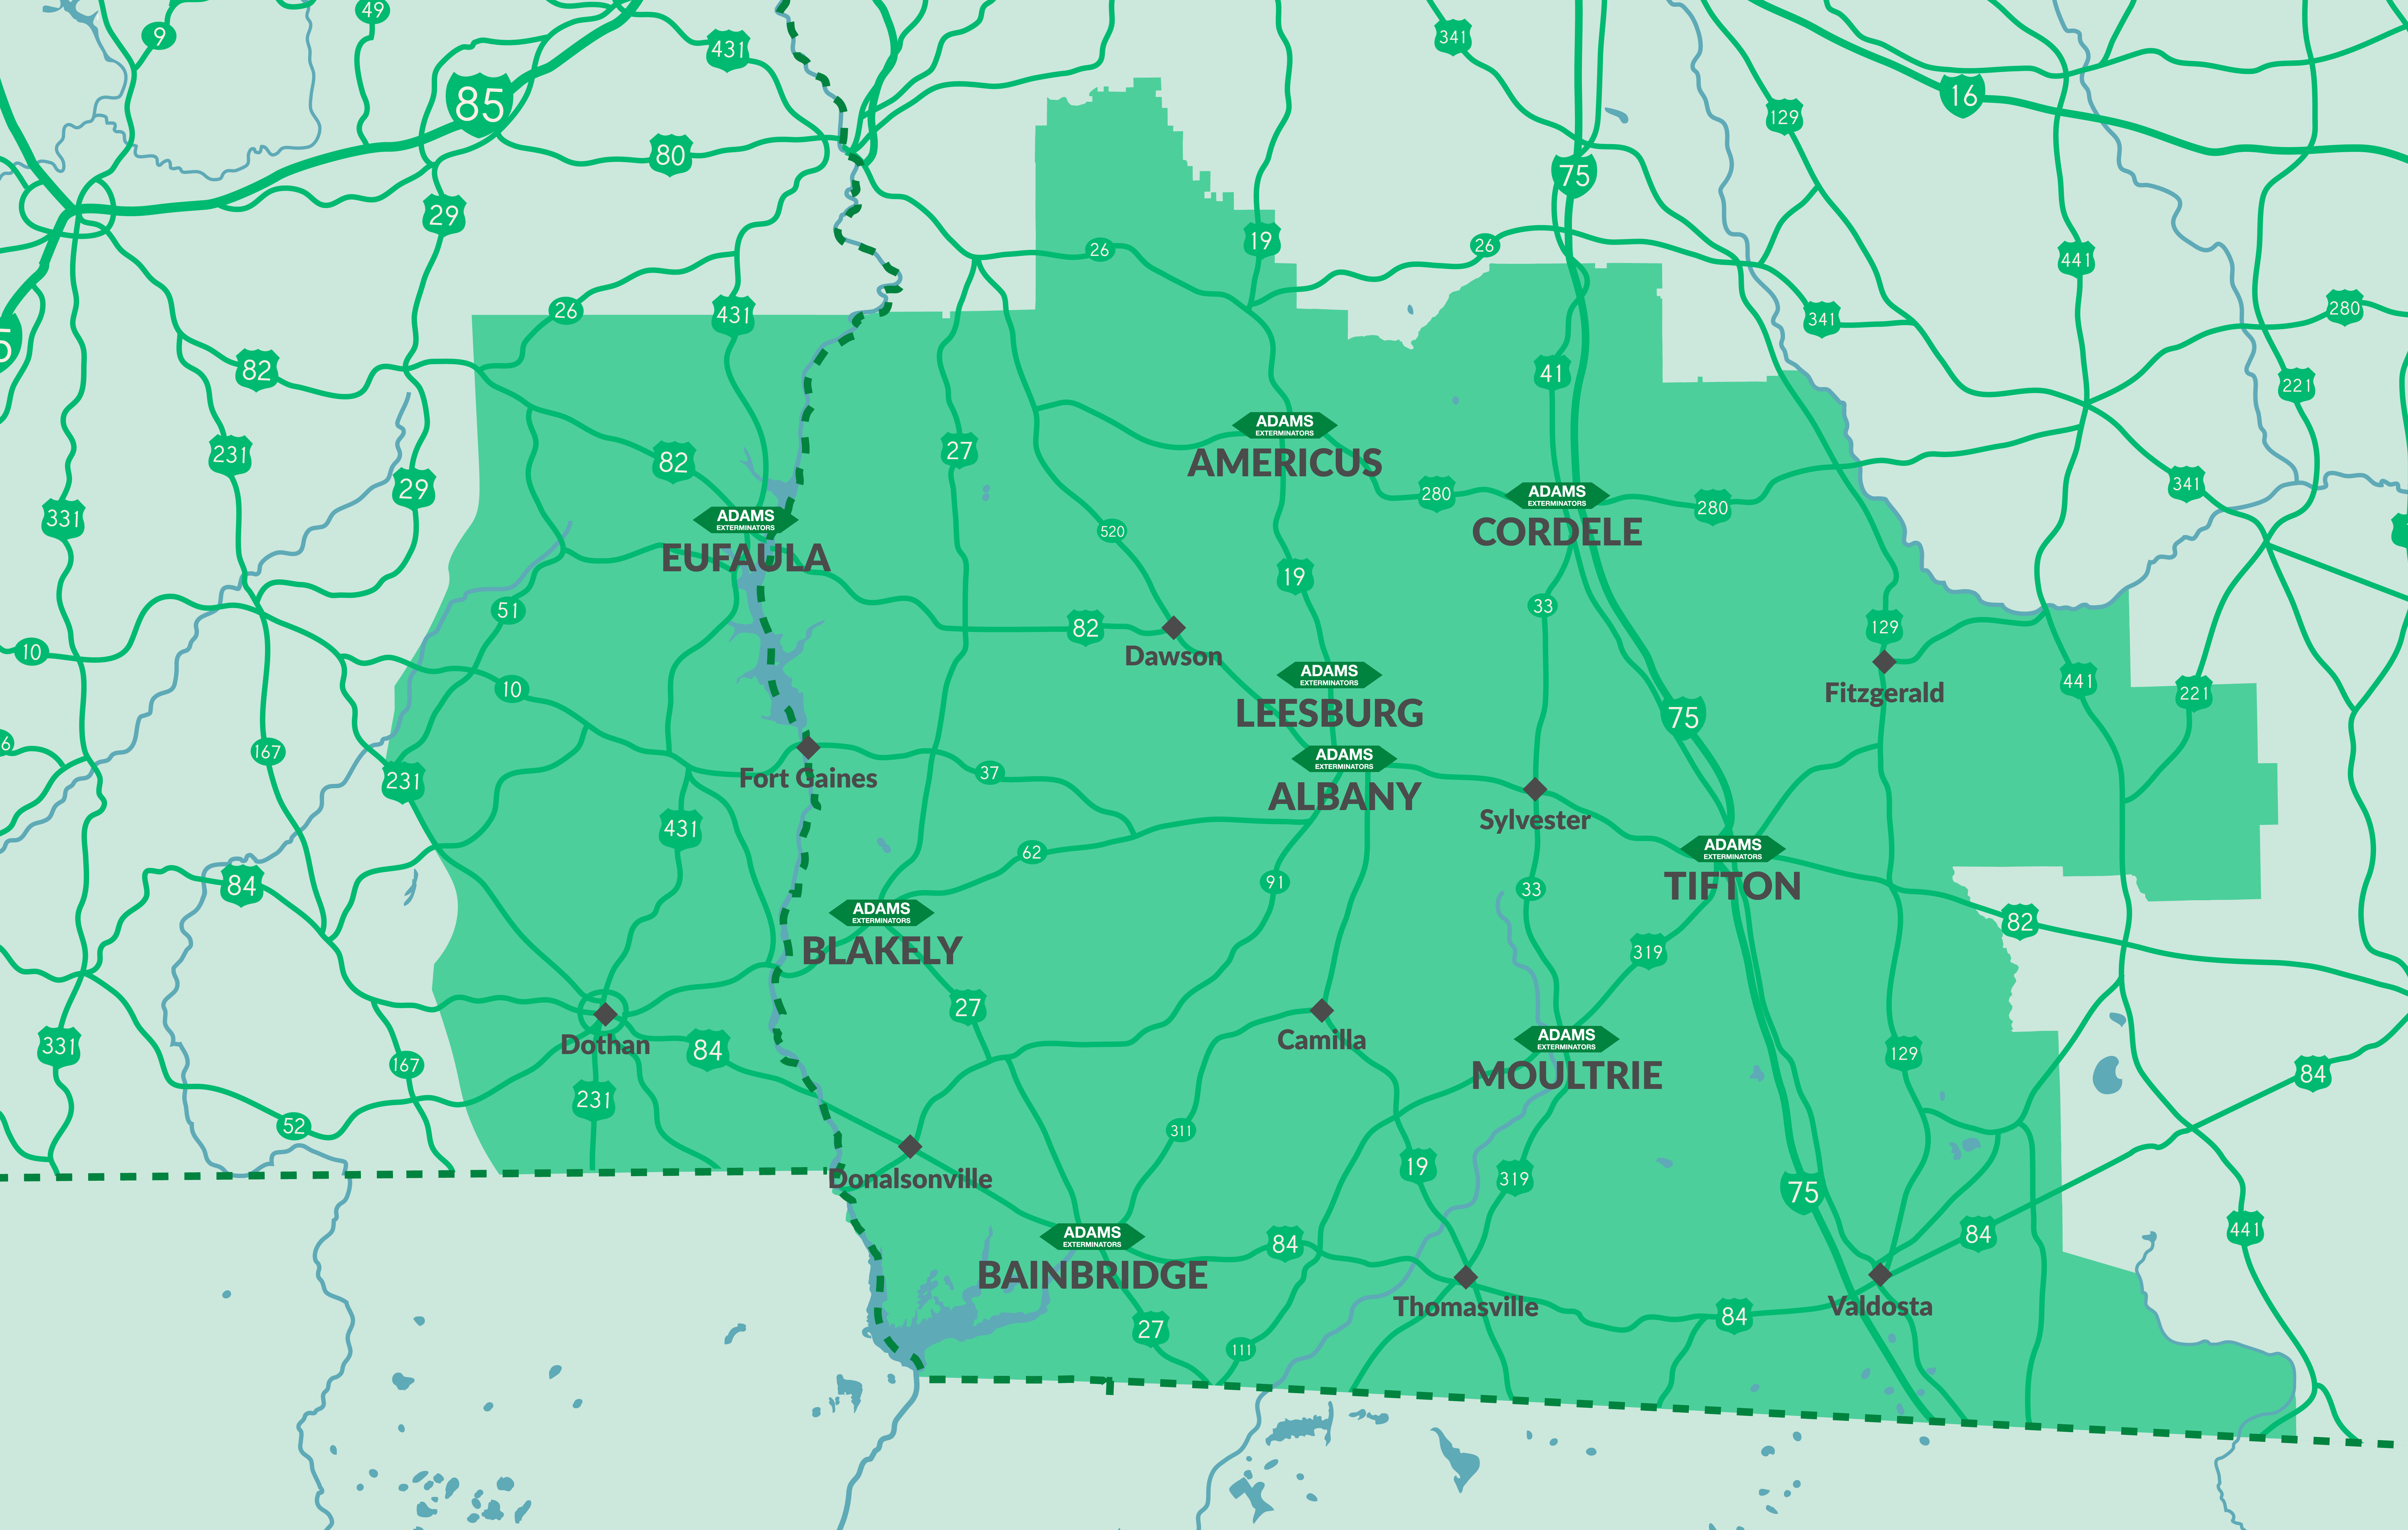 Map of Georgia county locations